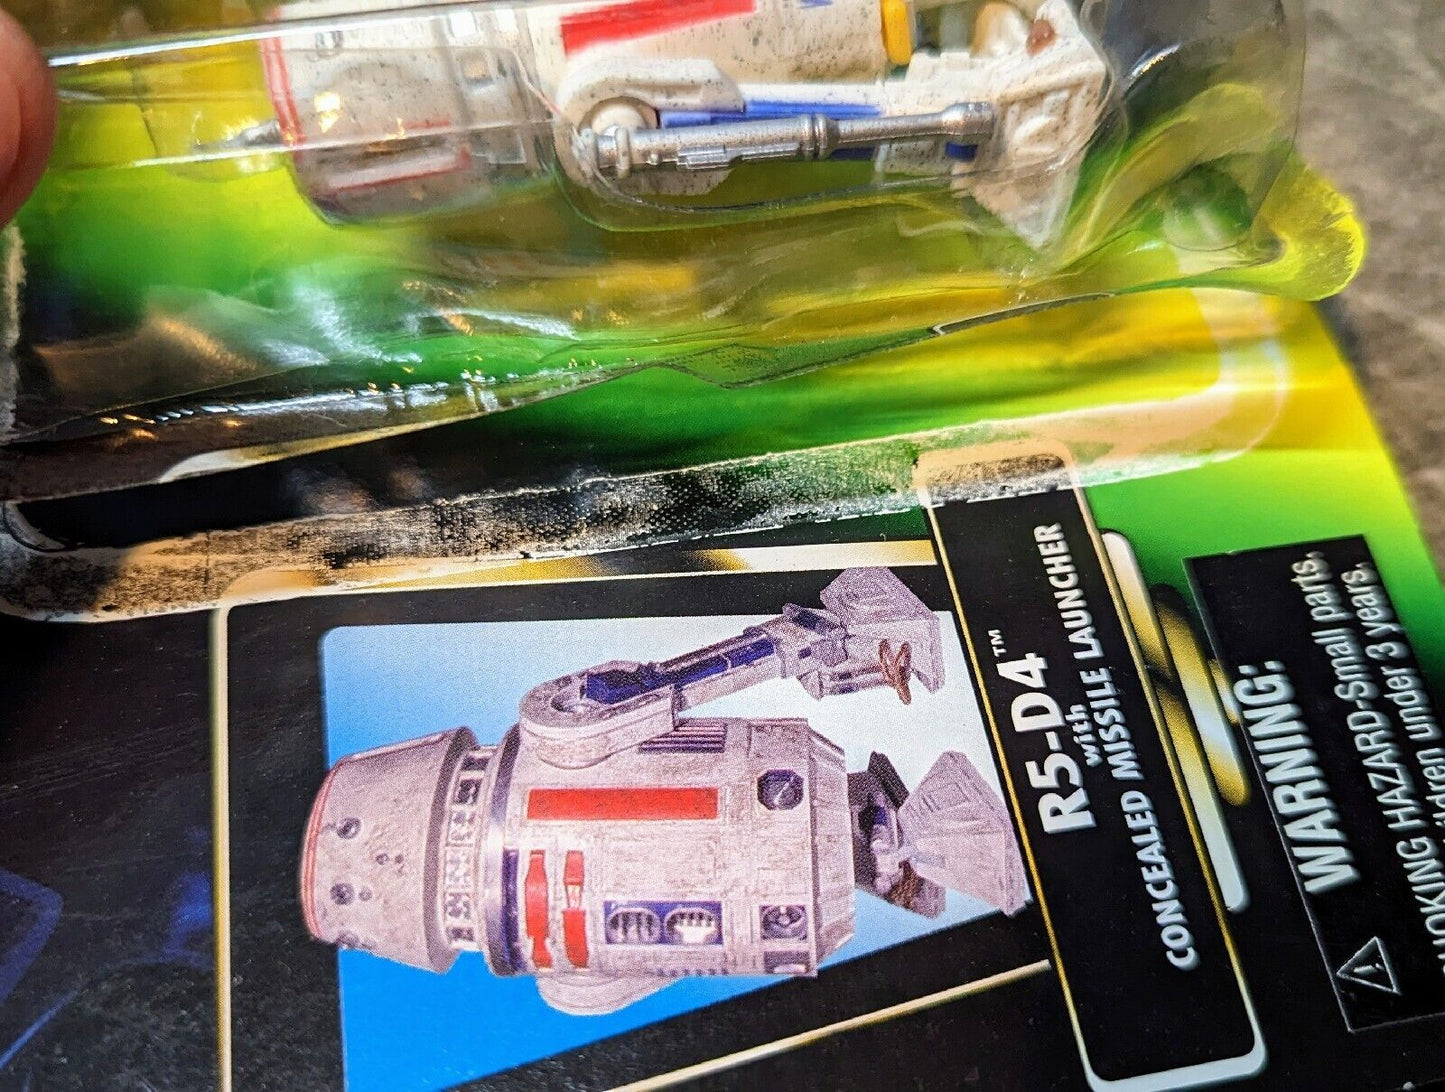 Star Wars R5-D4 Power of the force POTF